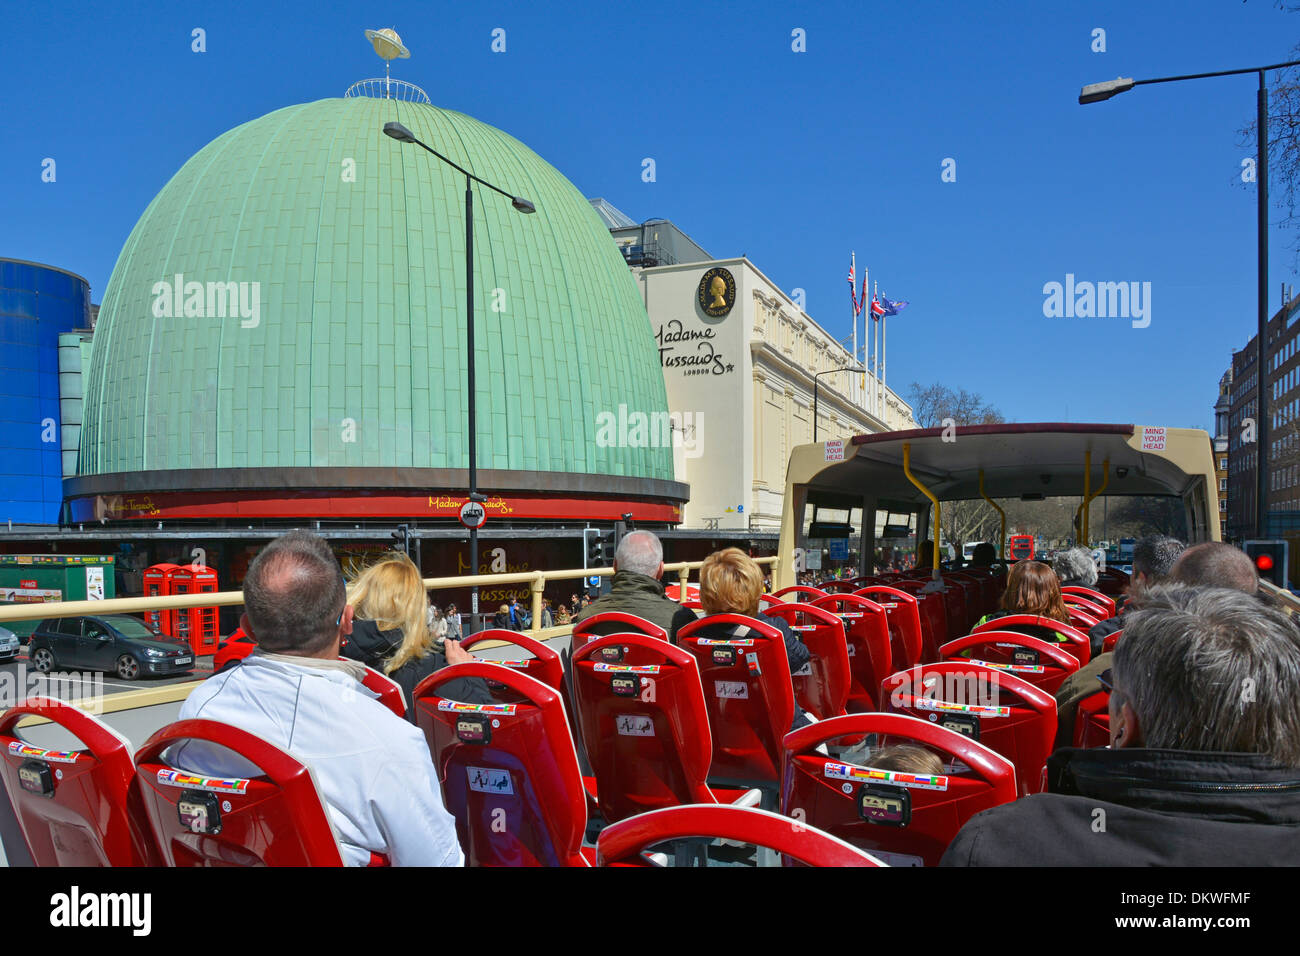 Tourists passengers open top sightseeing double decker tour bus &  green patina copper cladding dome of Madame Tussauds wax museum London England UK Stock Photo